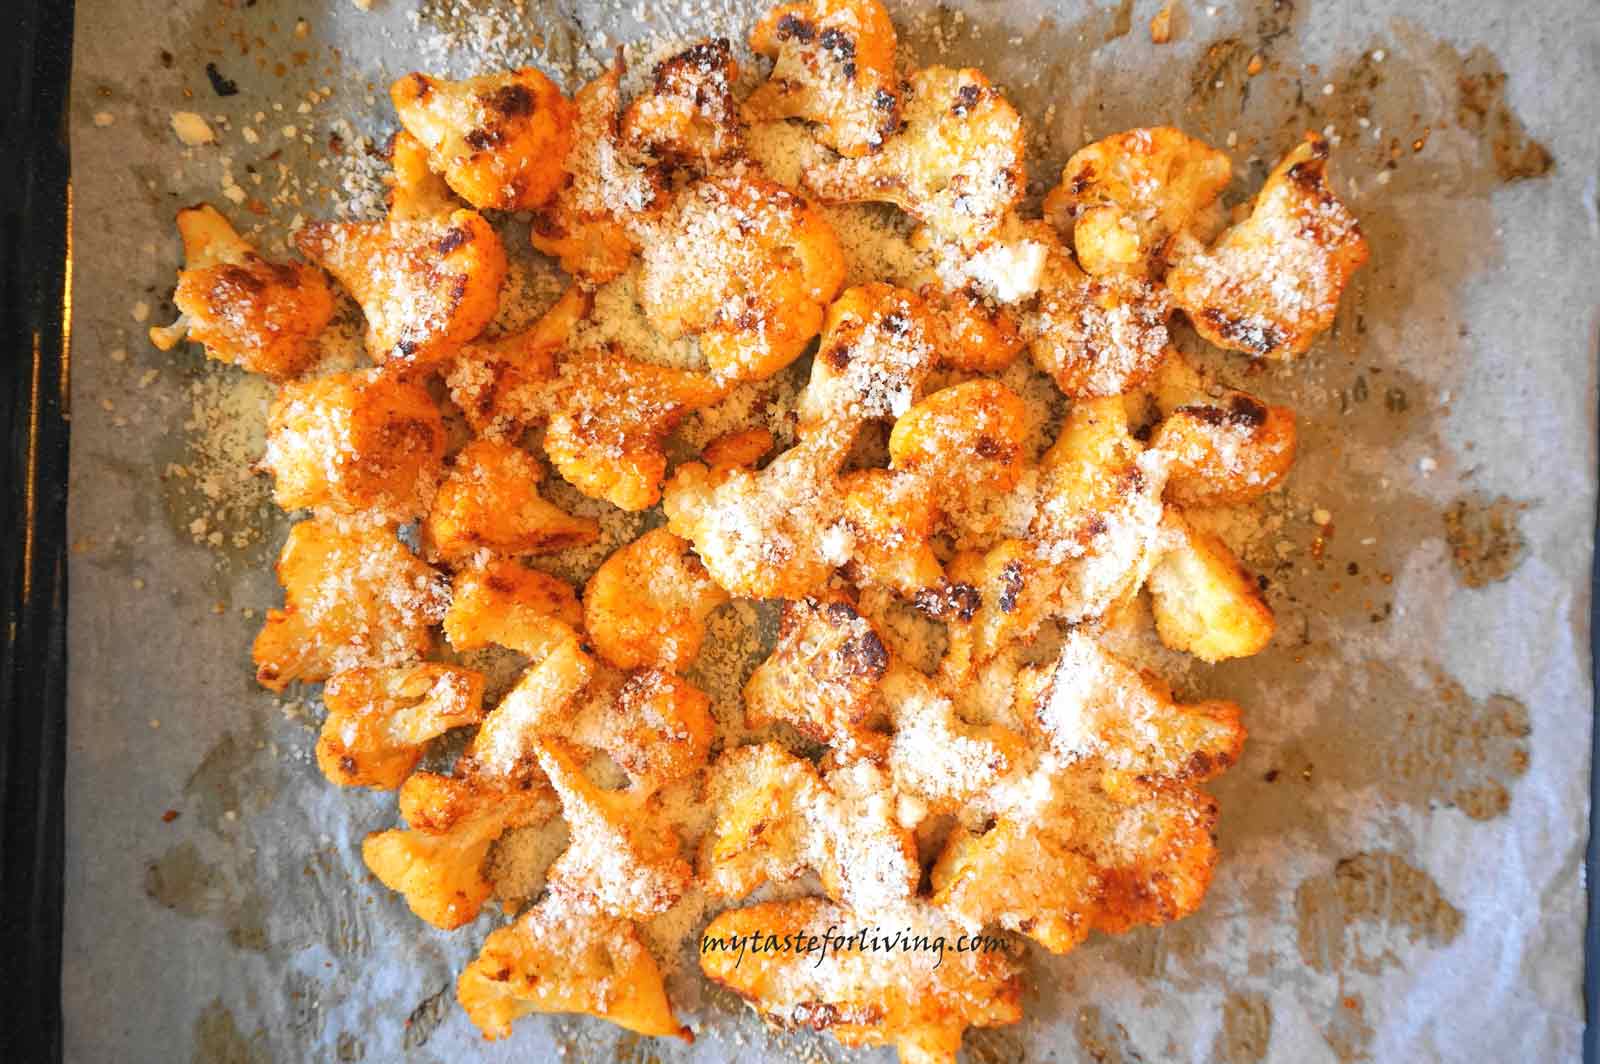 An easy and delicious recipe for fragrant cauliflower with garlic, baked in the oven with parmesan.